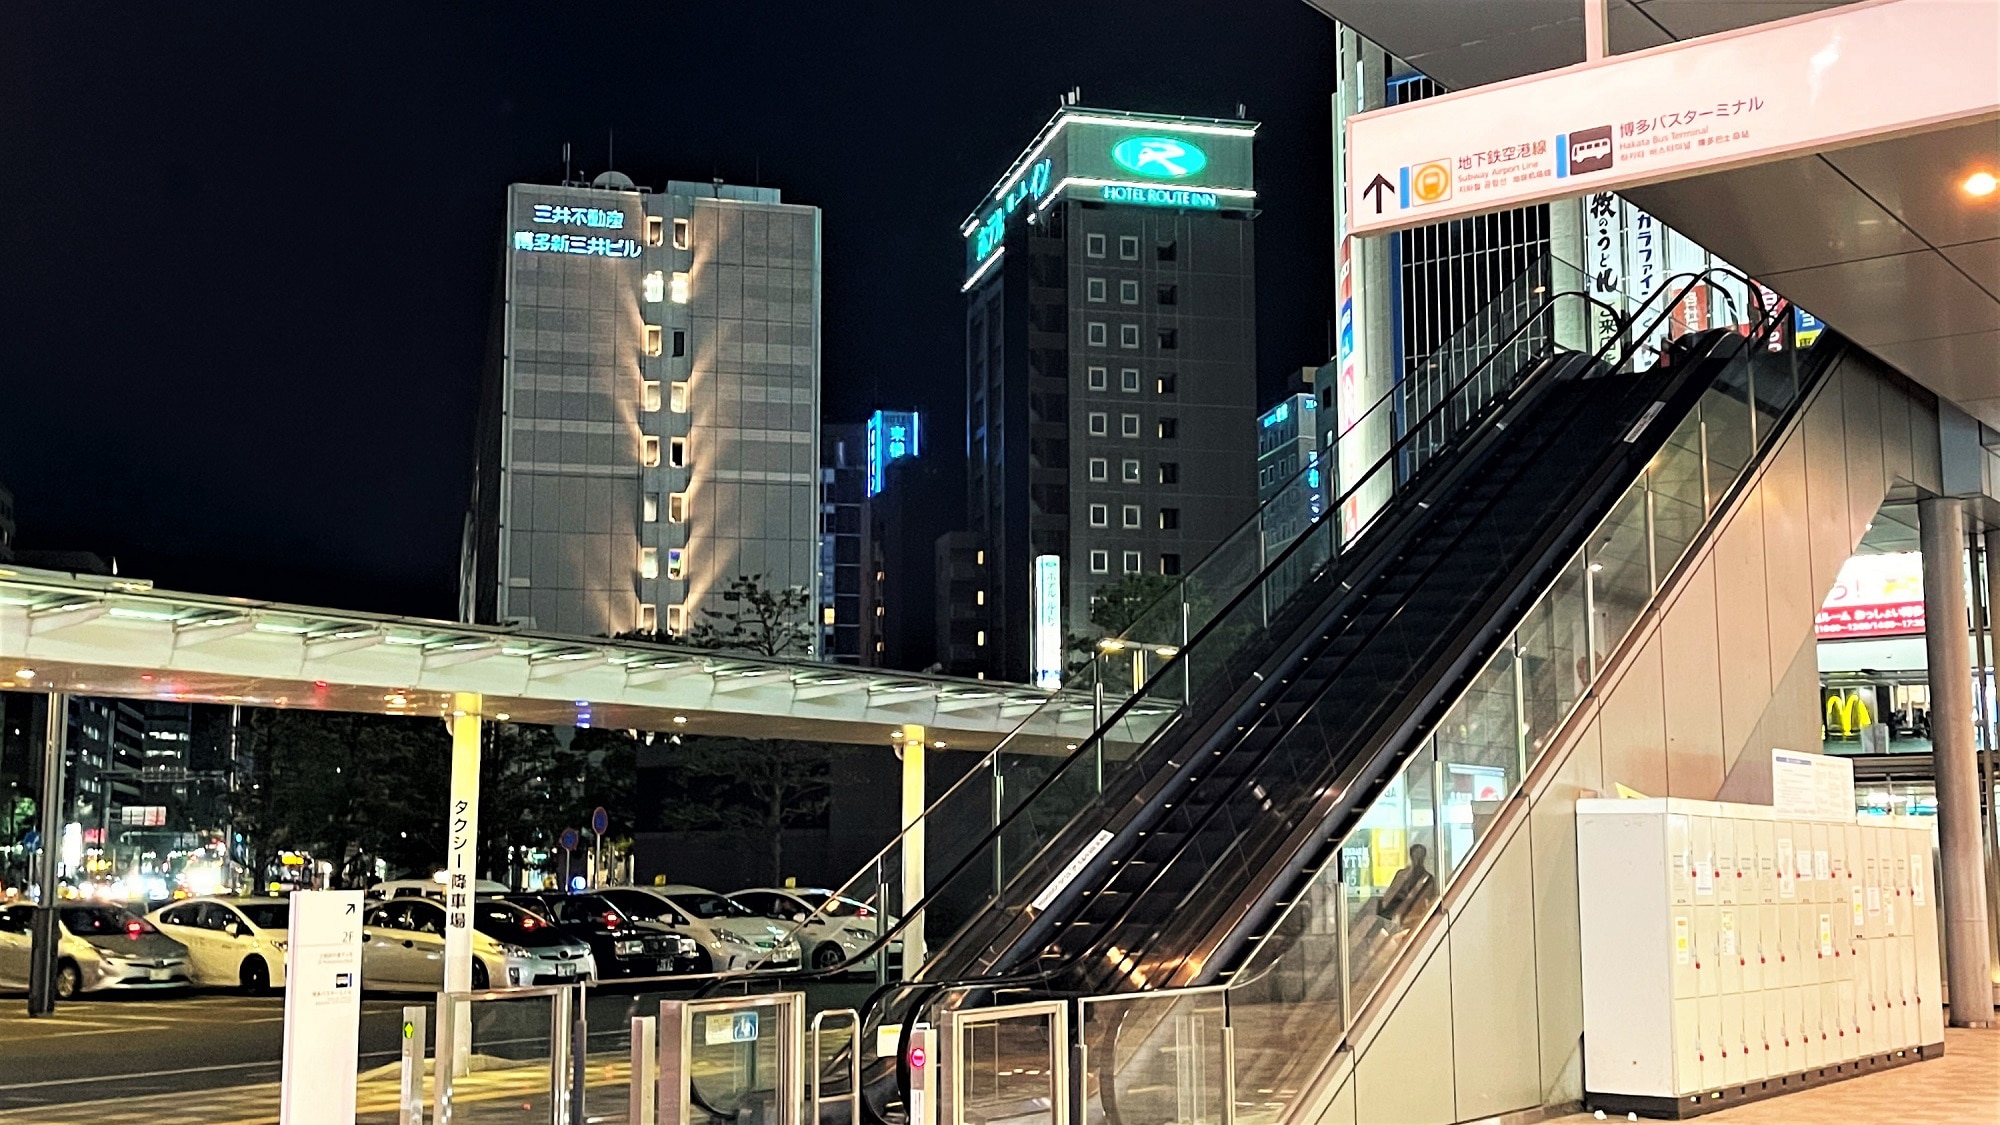 From Hakata Station towards the hotel (night view) ☆